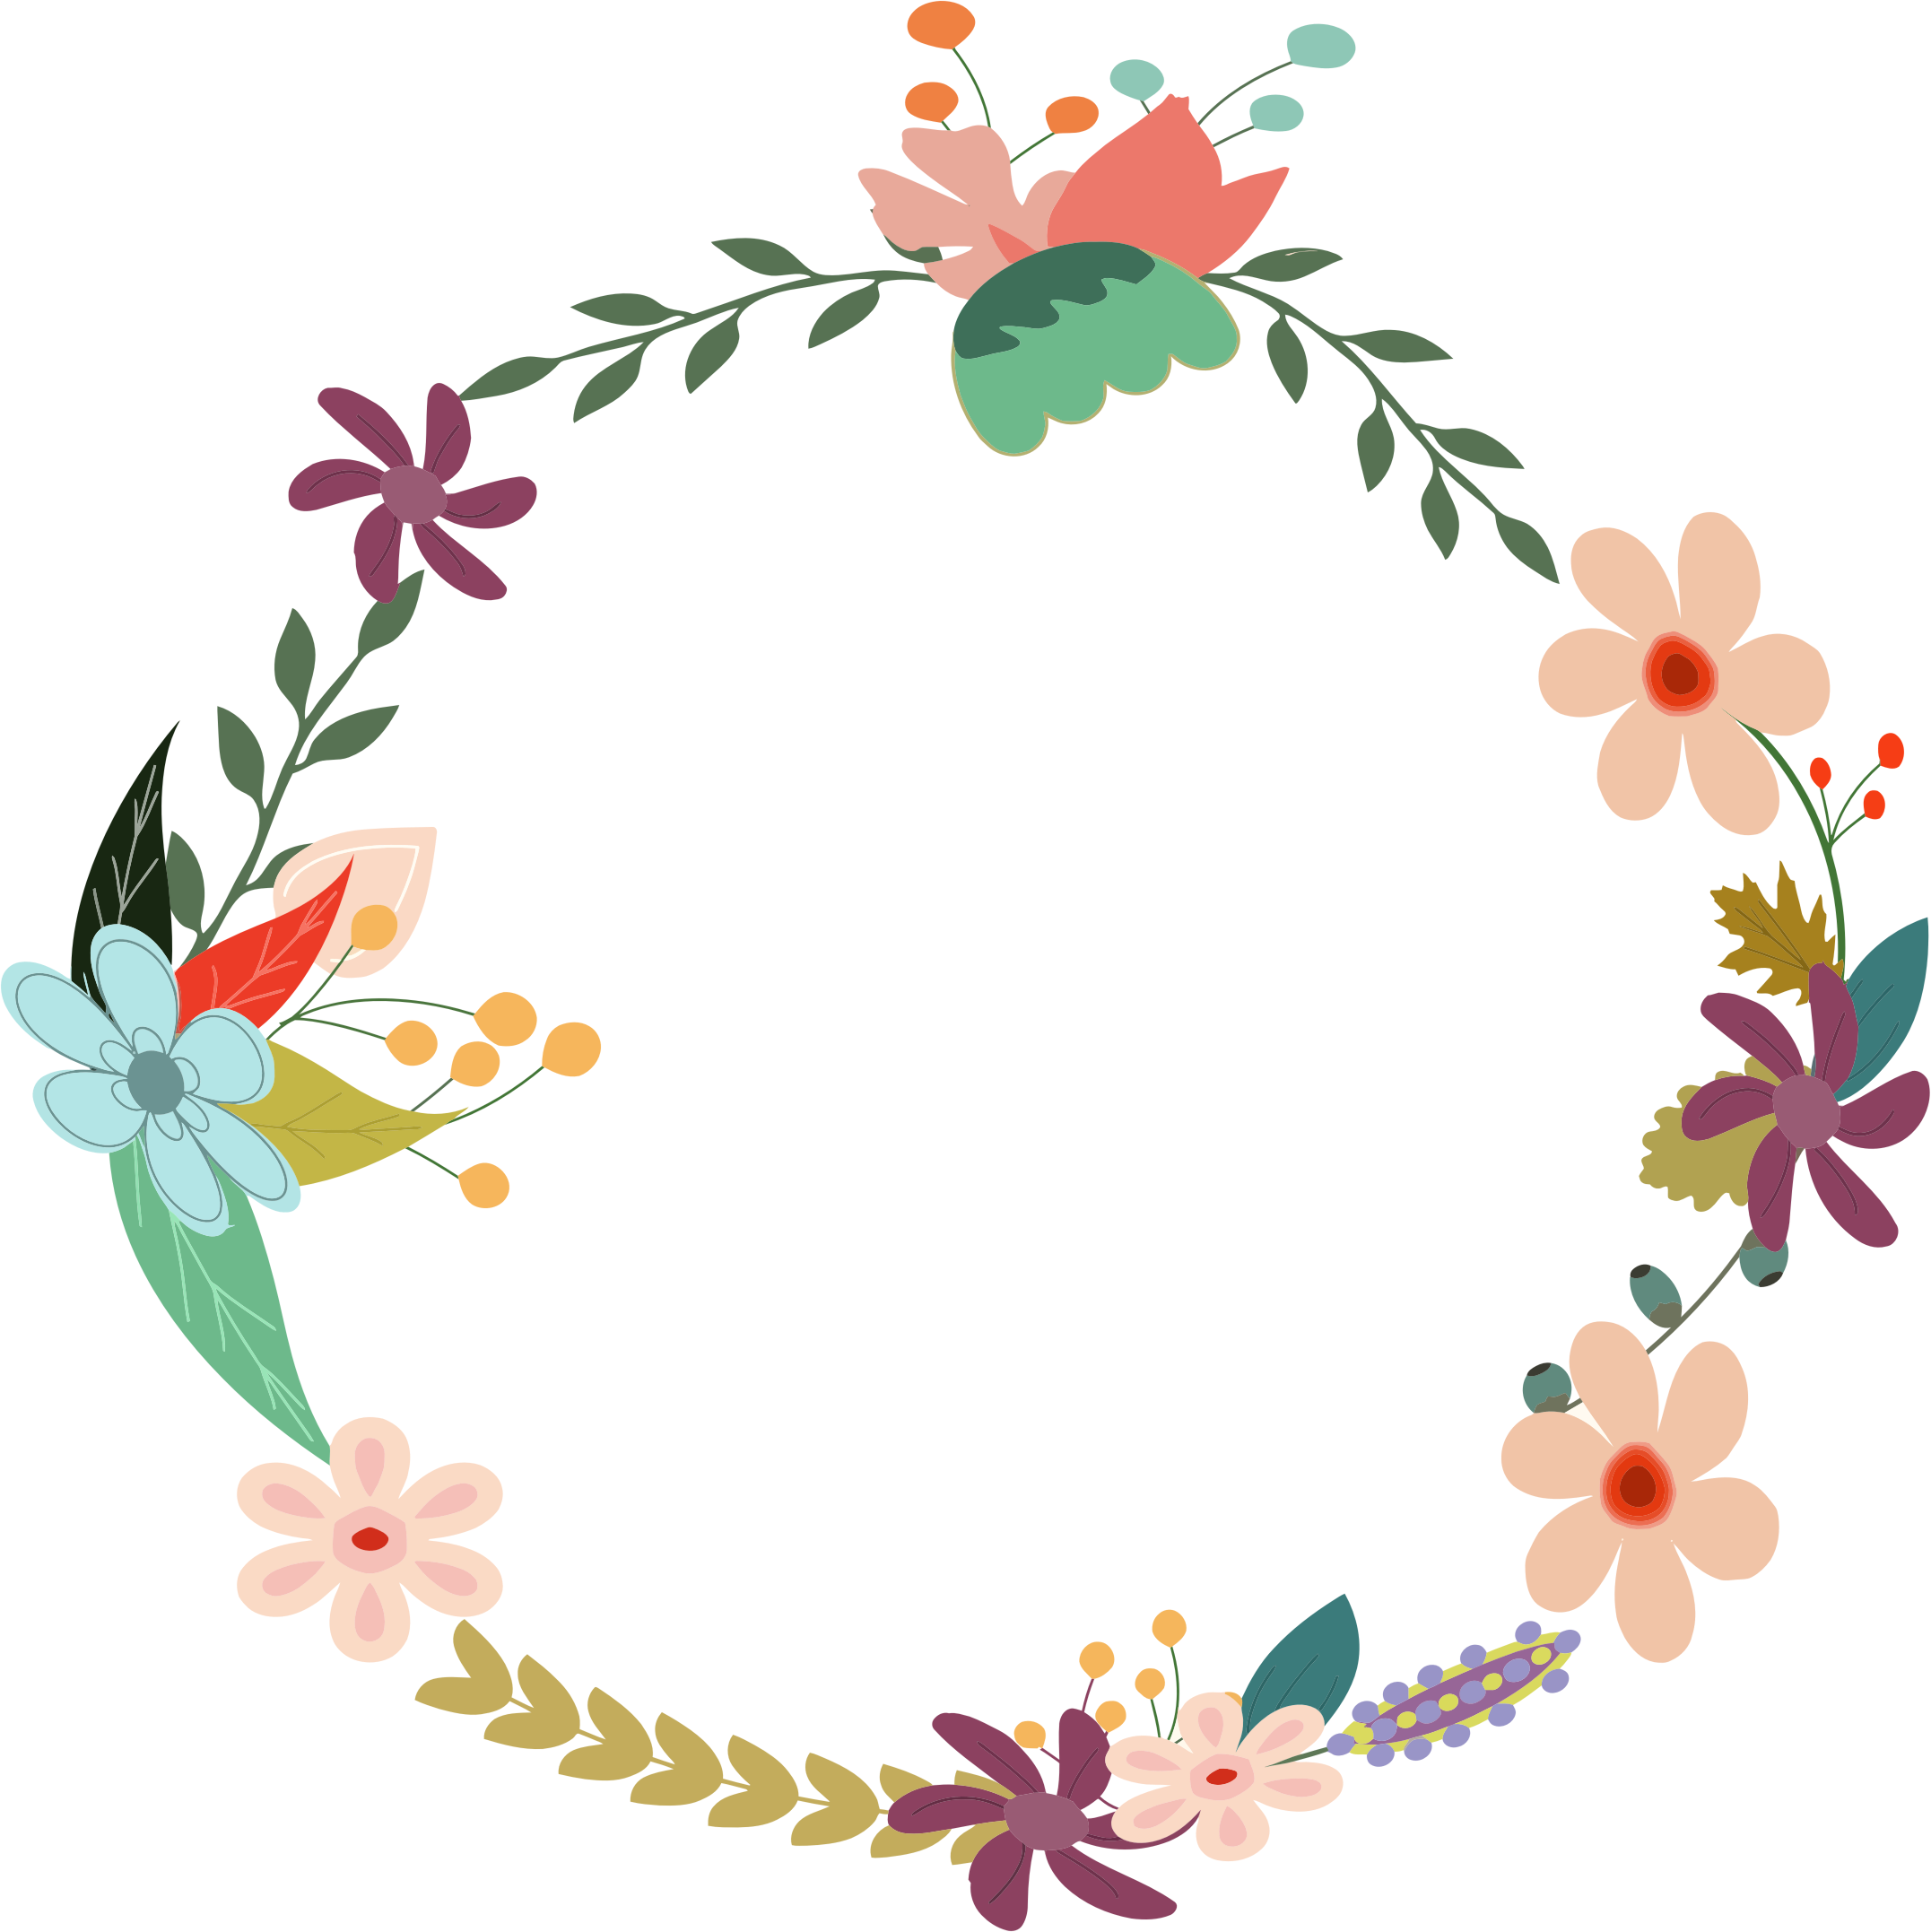 Navy clipart wreath.  collection of free